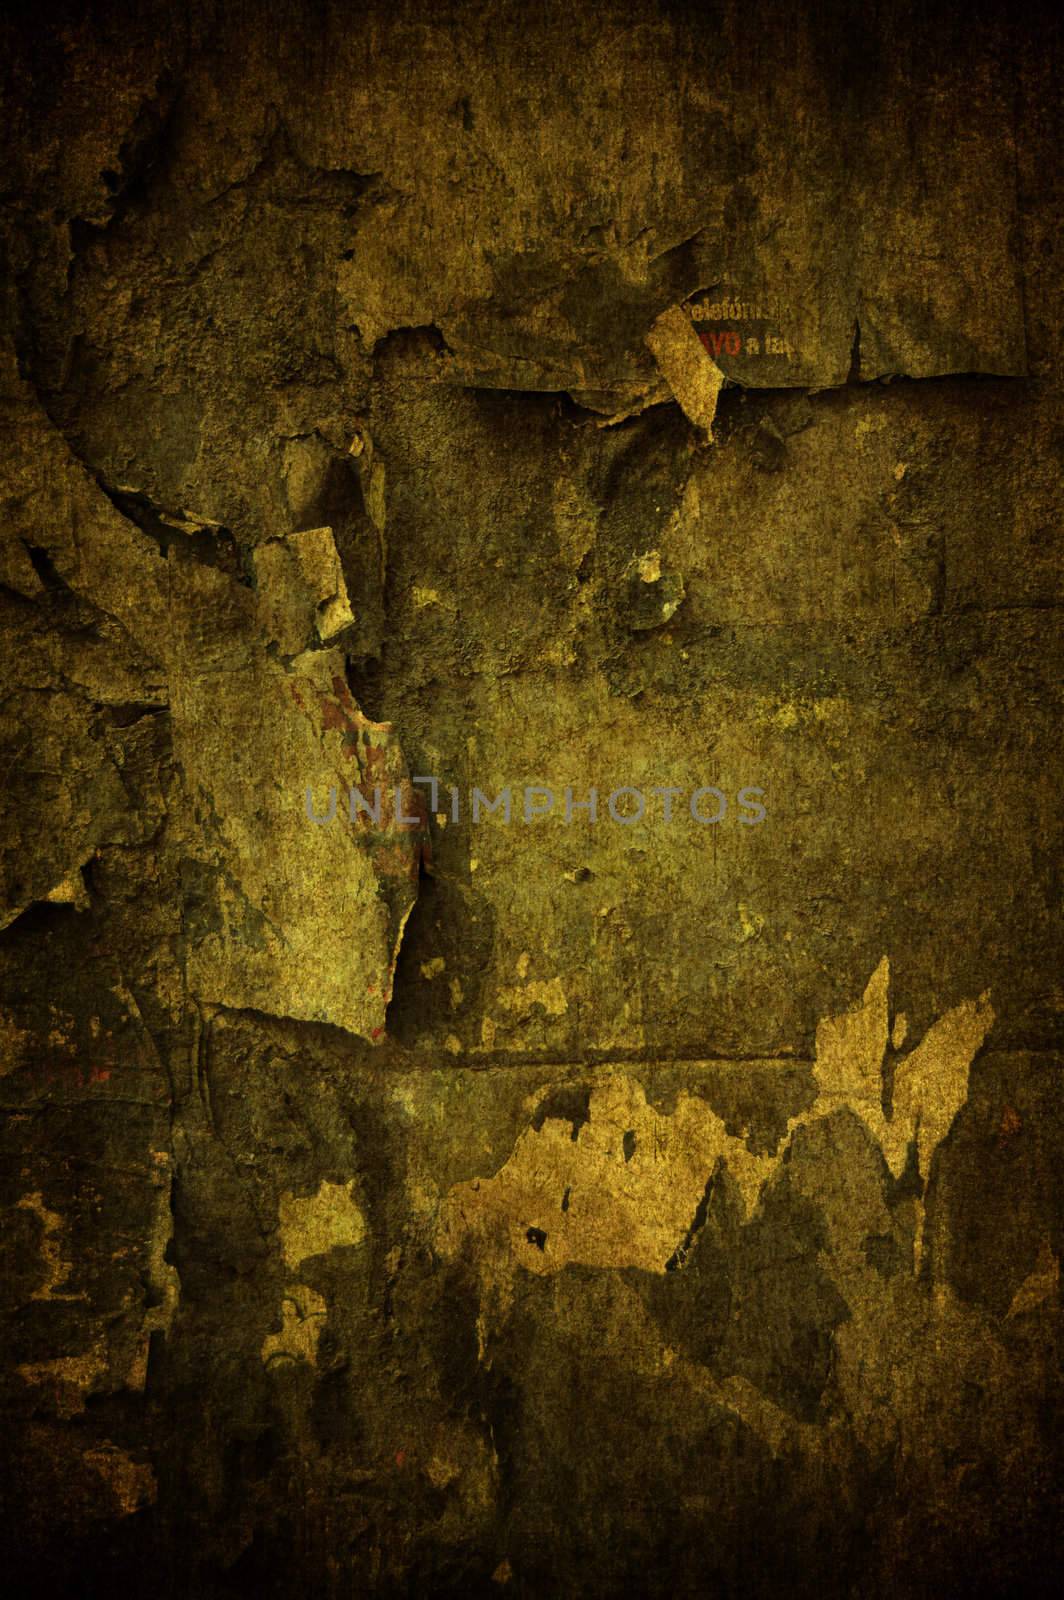 A cracked grunge concrete background with papers